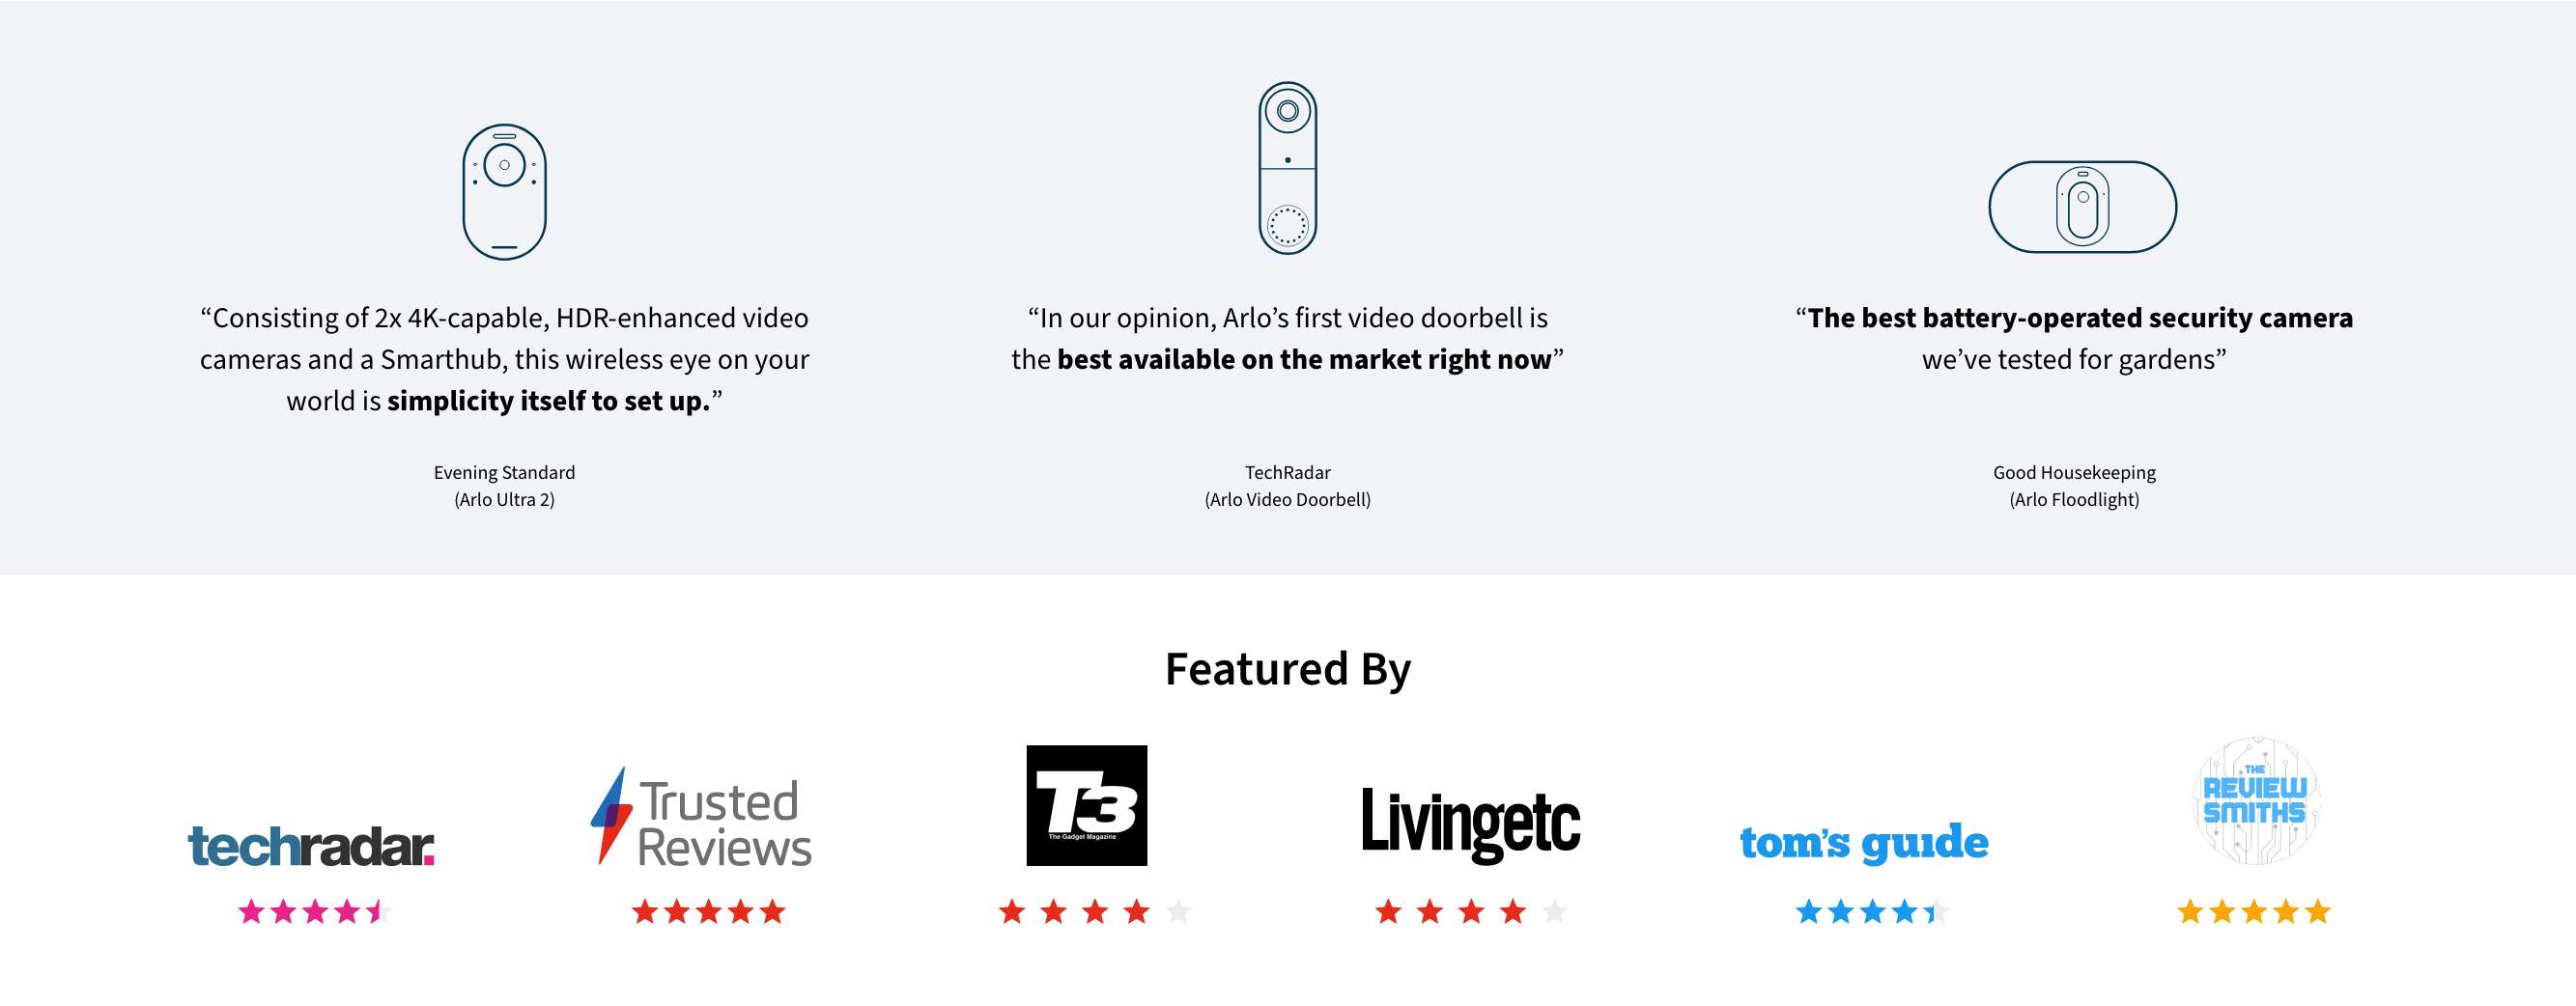 Ratings and reviews of Arlo security cameras and doorbells from Good Housekeeping, TechRadar and Evening Standard